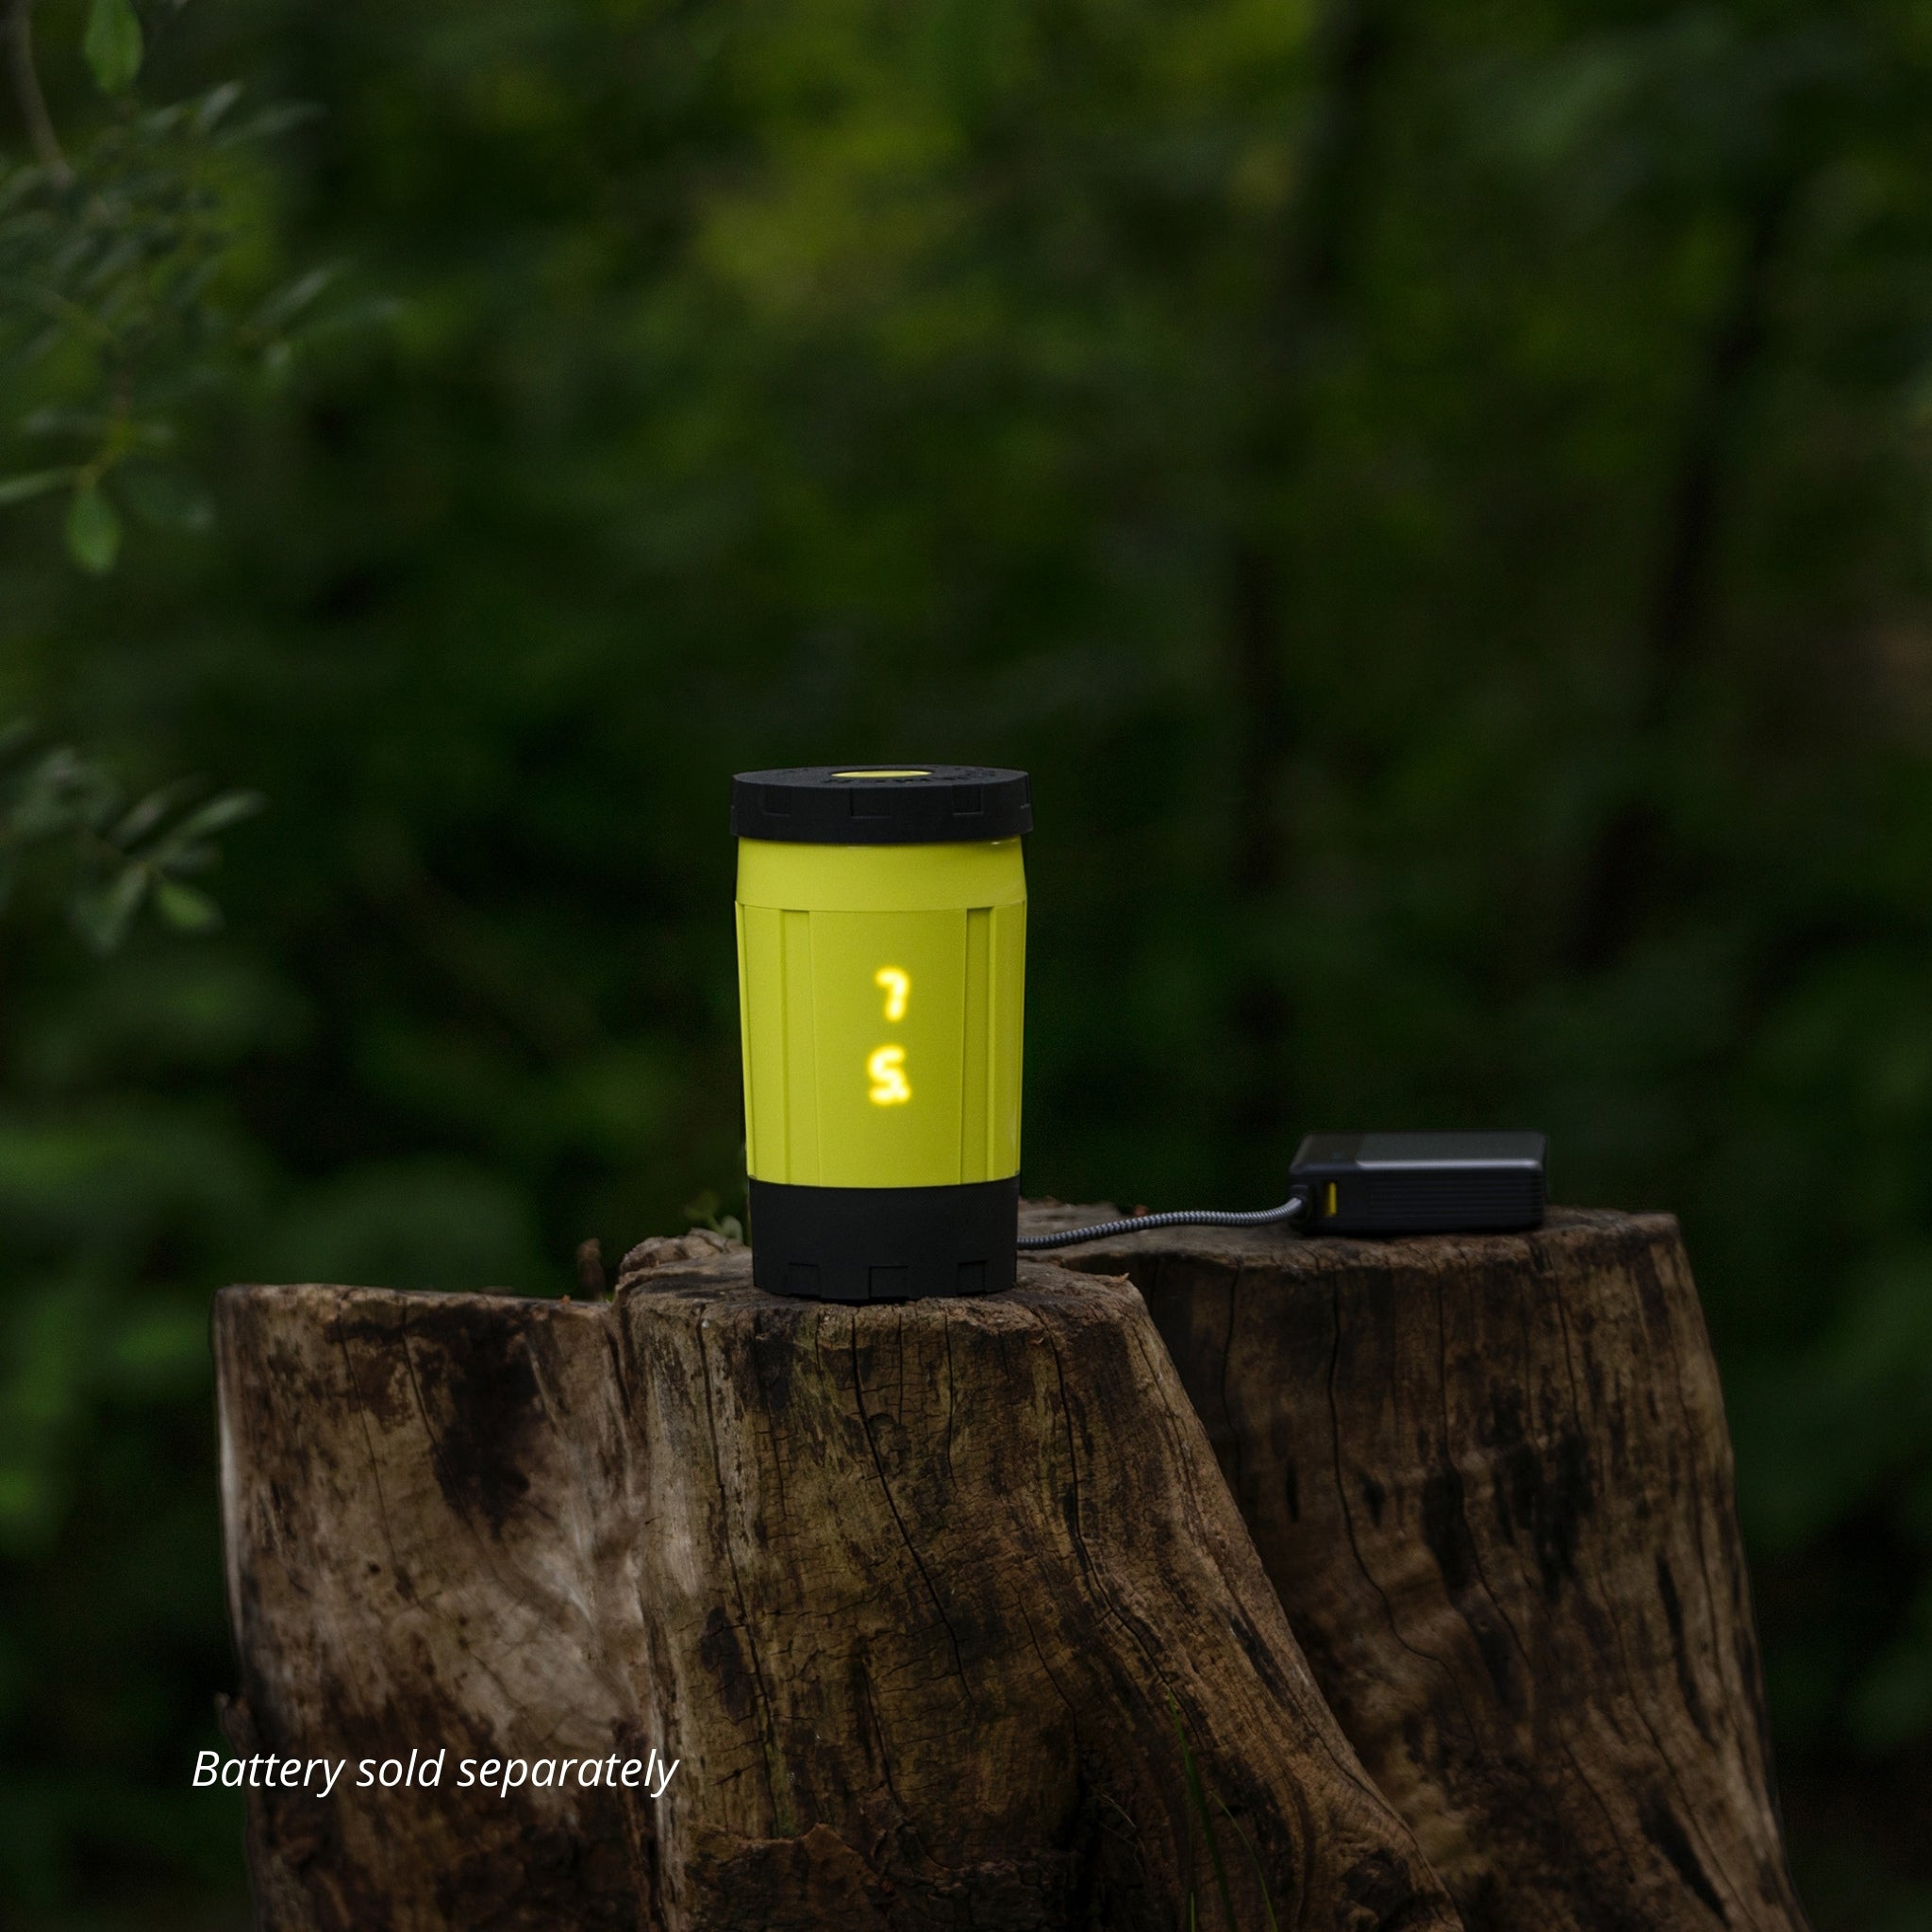 Sustainable flameless electric backpacking stove displaying 75C plugged into USB-C battery on tree stump